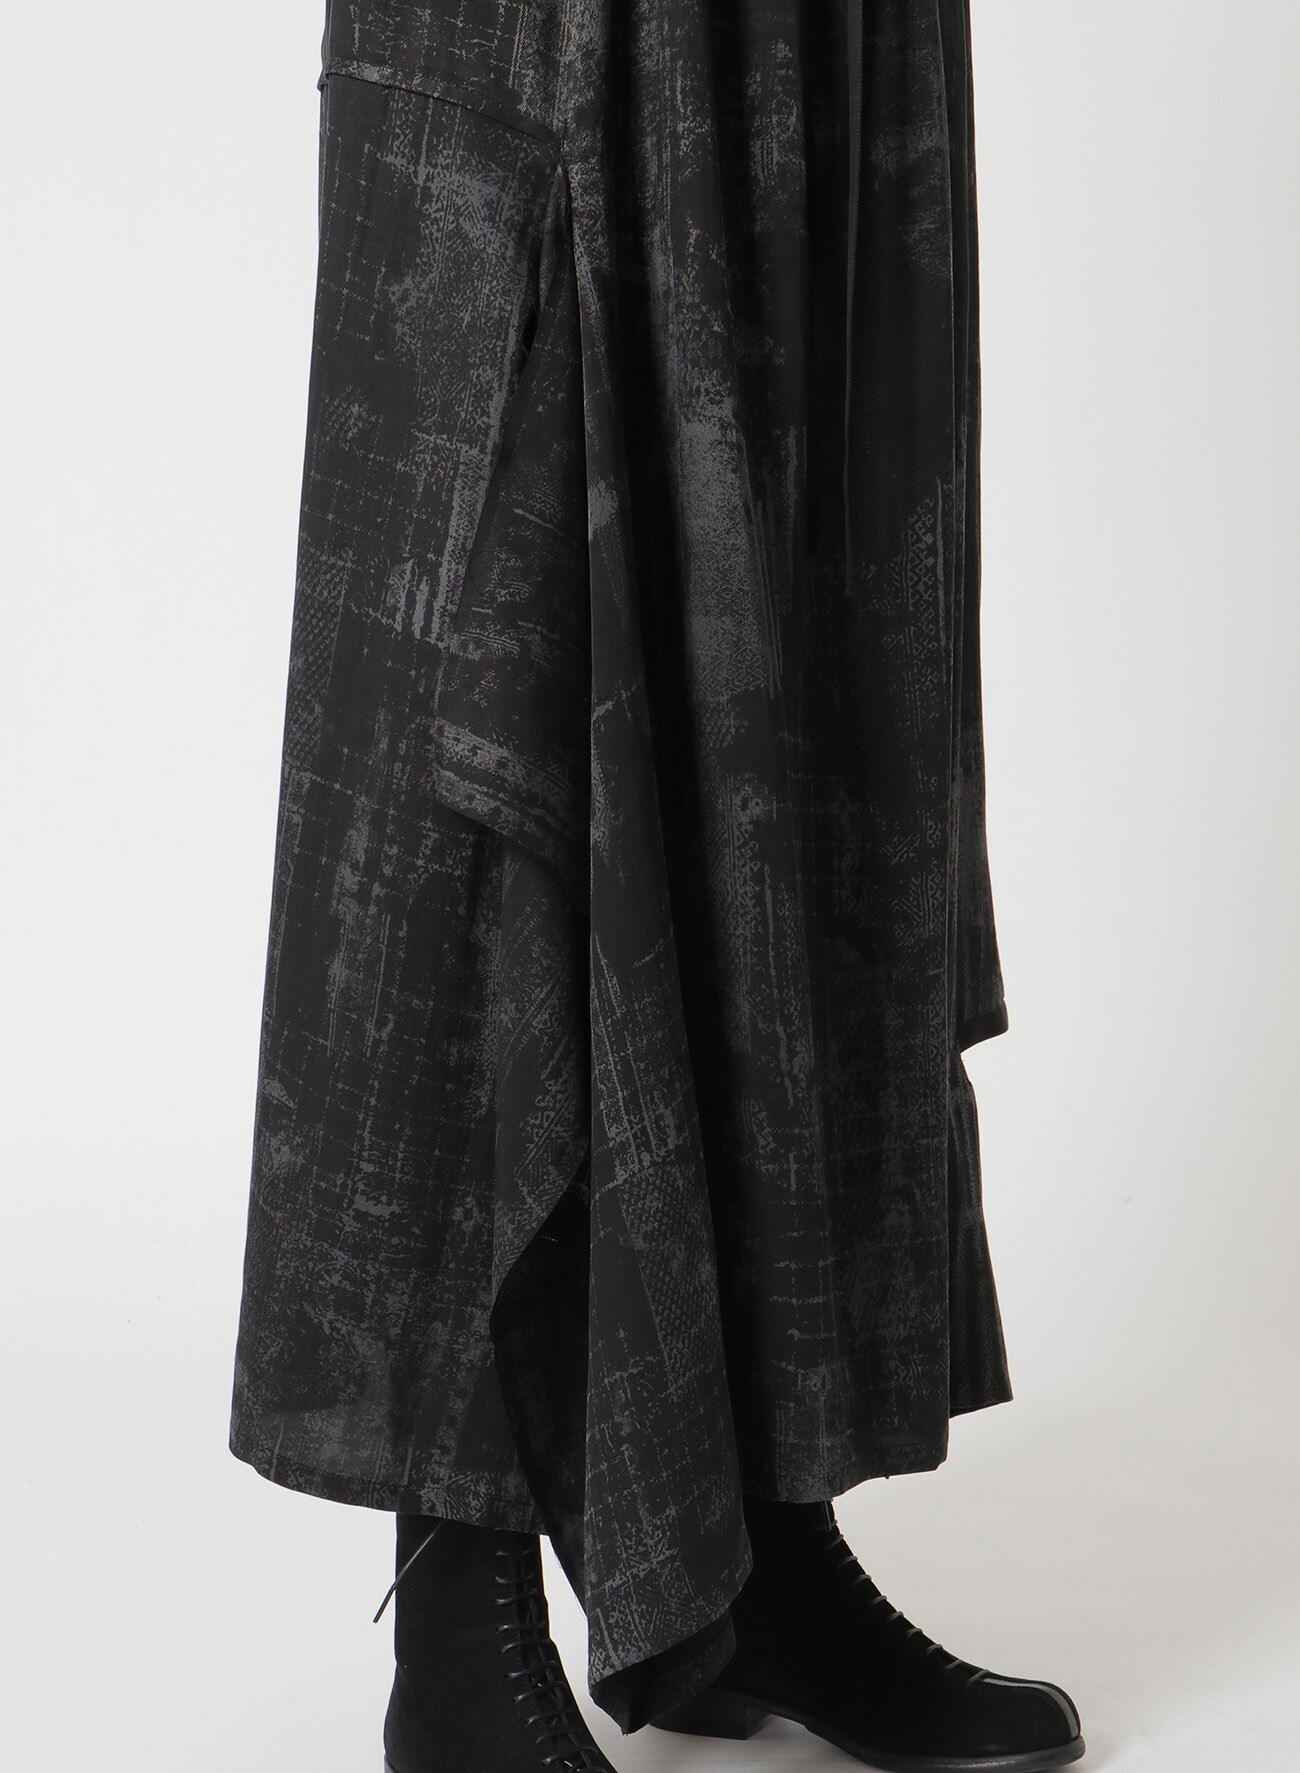 CURPO/RAYON TWILL LEFT HOLE DETAIL SKIRT